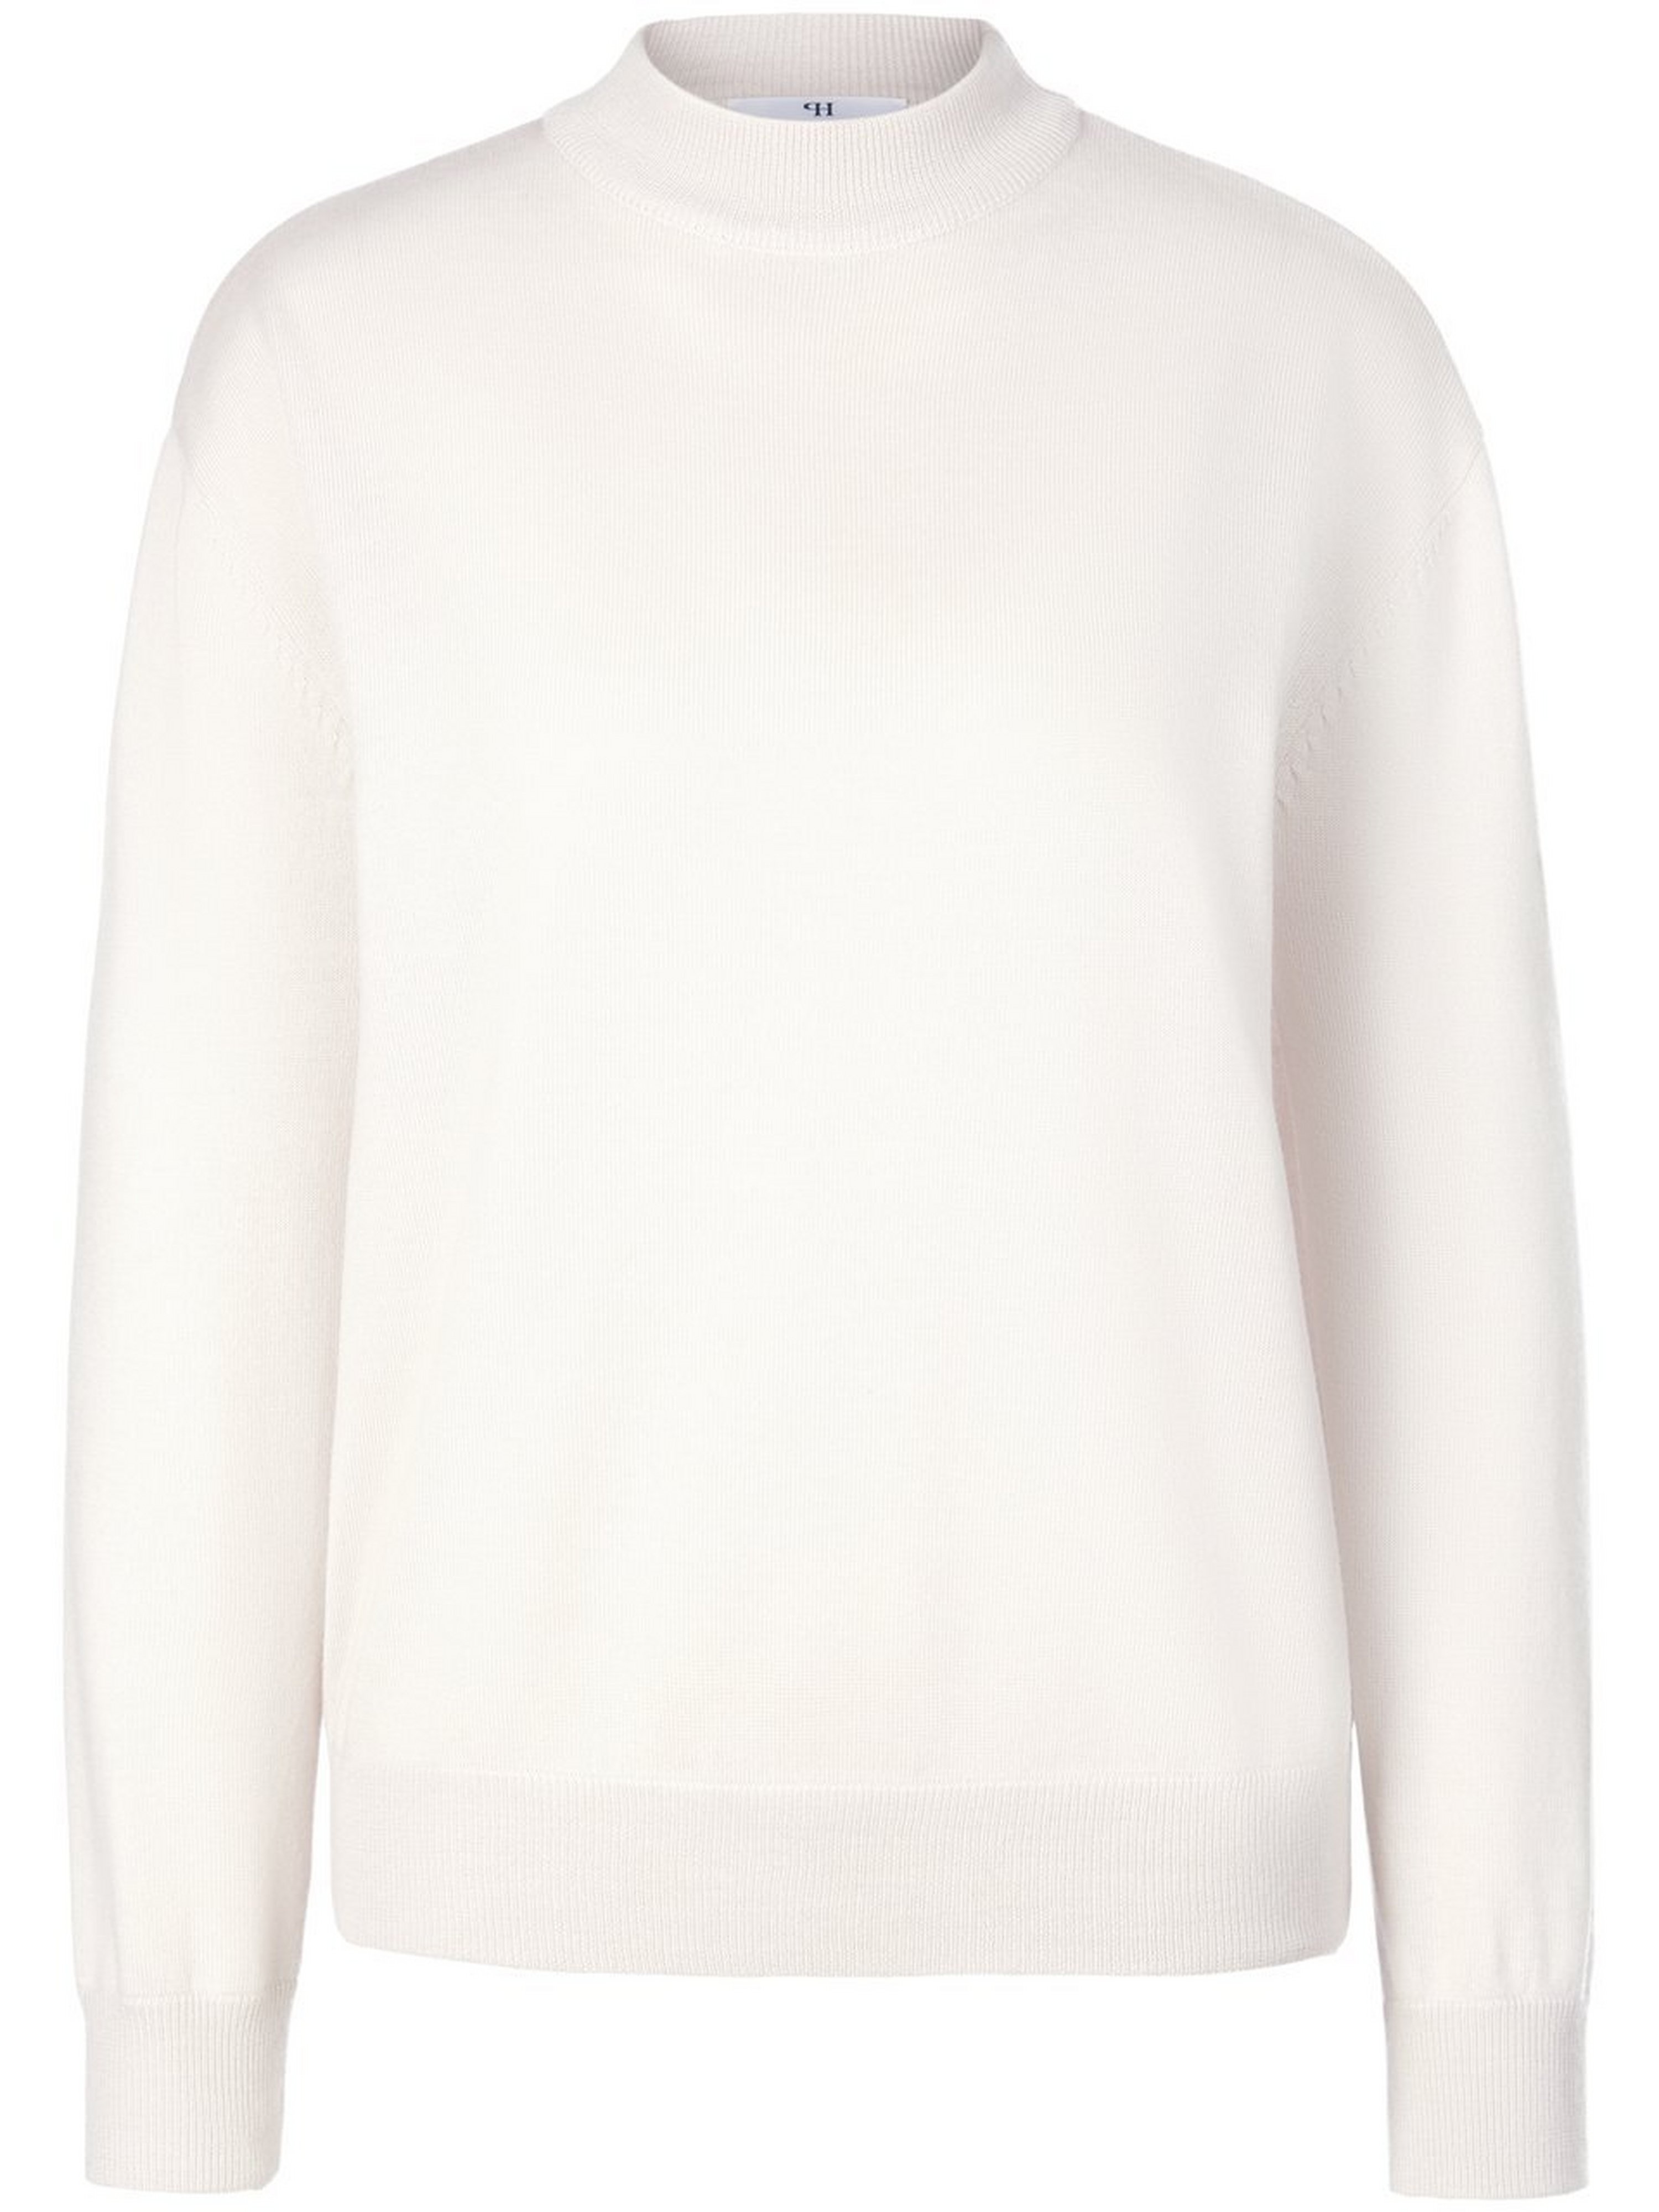 Le pull manches longues  Peter Hahn beige